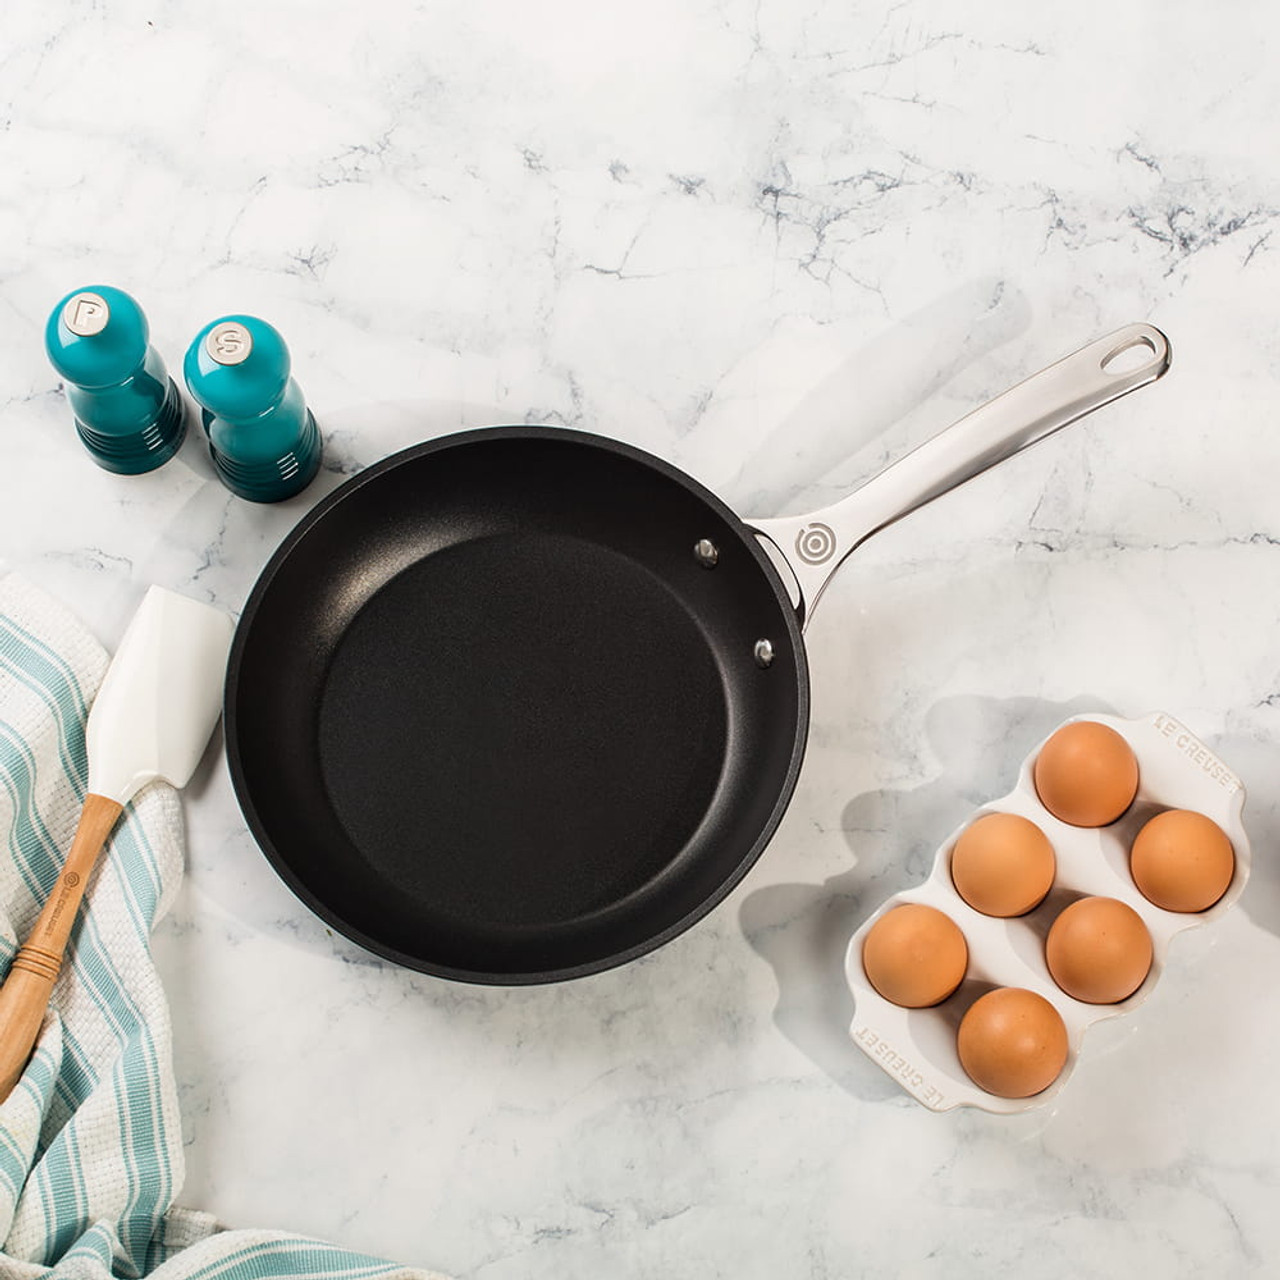 https://cdn11.bigcommerce.com/s-hccytny0od/images/stencil/1280x1280/products/3303/11827/le-creuset-tns-pro-fry-pan-1__17430.1592345723.jpg?c=2?imbypass=on